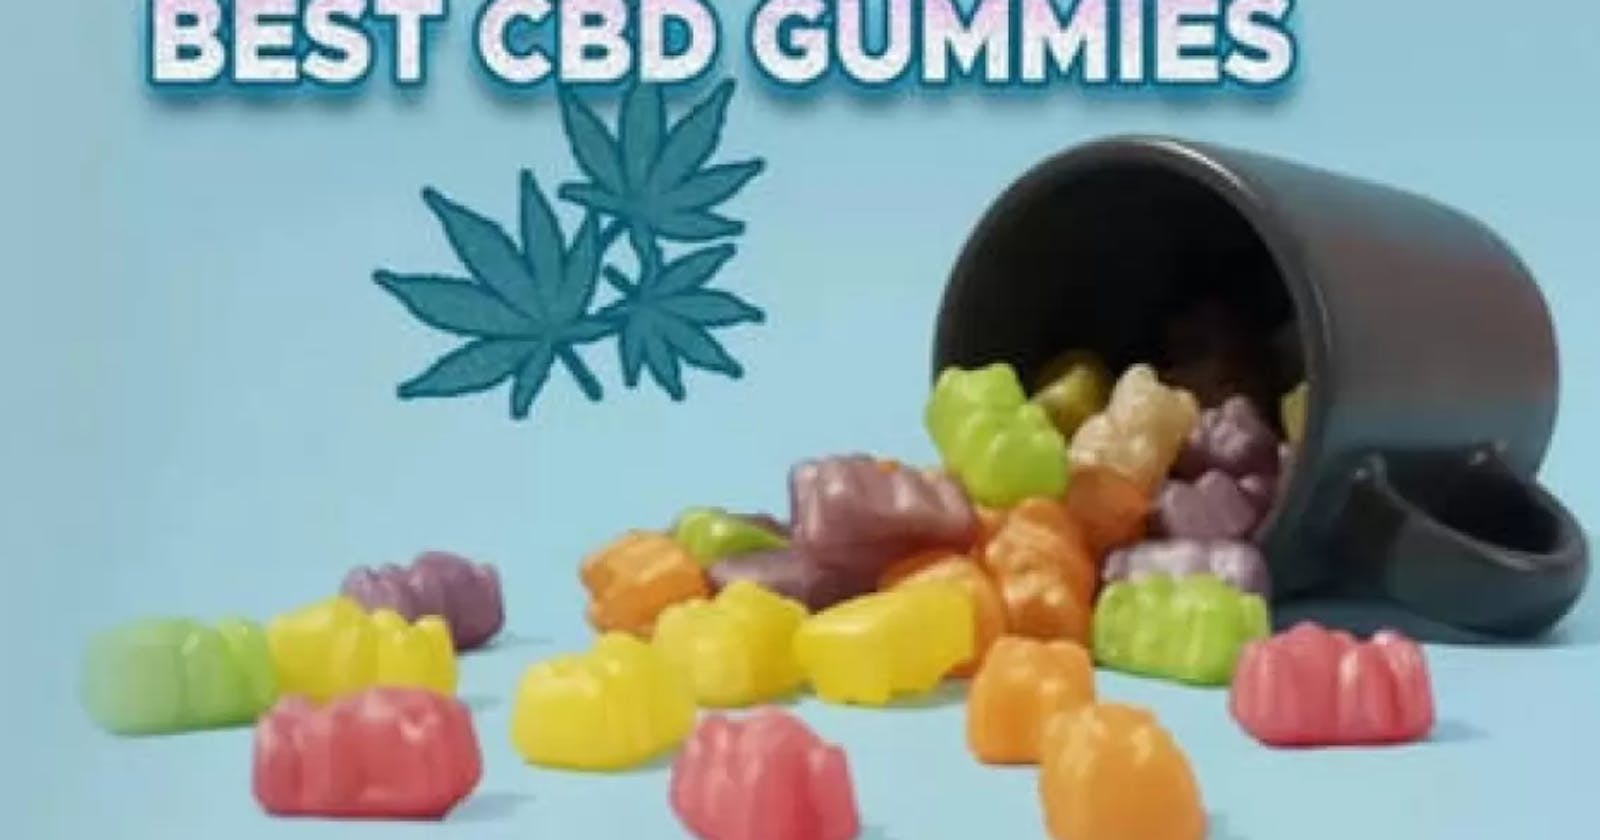 Joint Plus CBD Gummies (URGENT MEDICAL WARNING!) ...By Medial Expert!